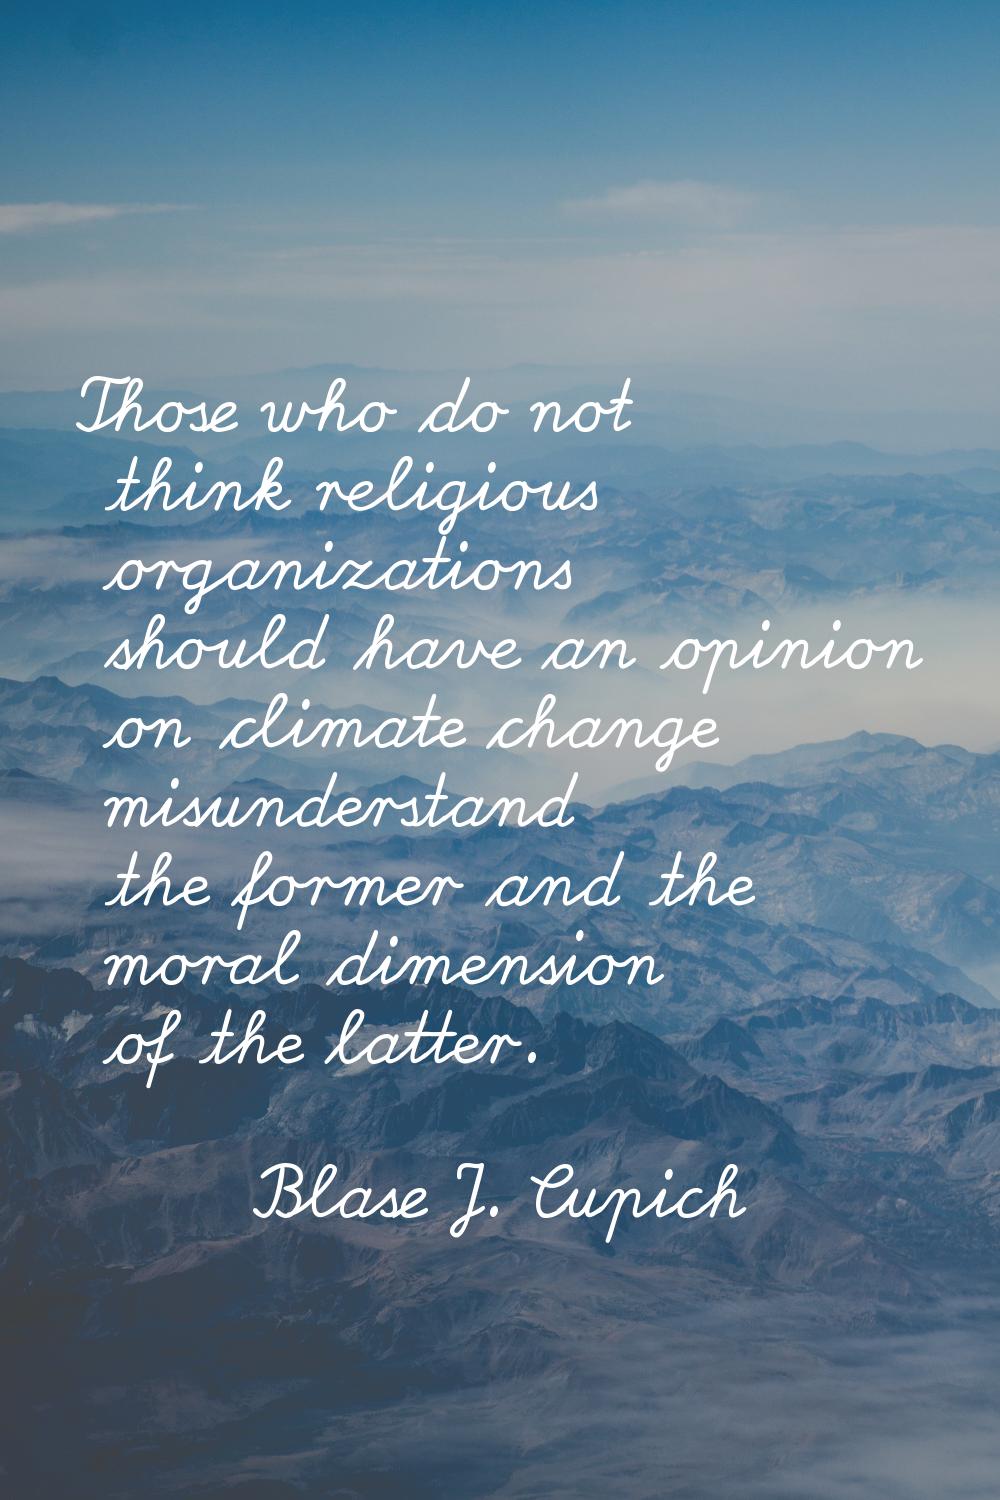 Those who do not think religious organizations should have an opinion on climate change misundersta